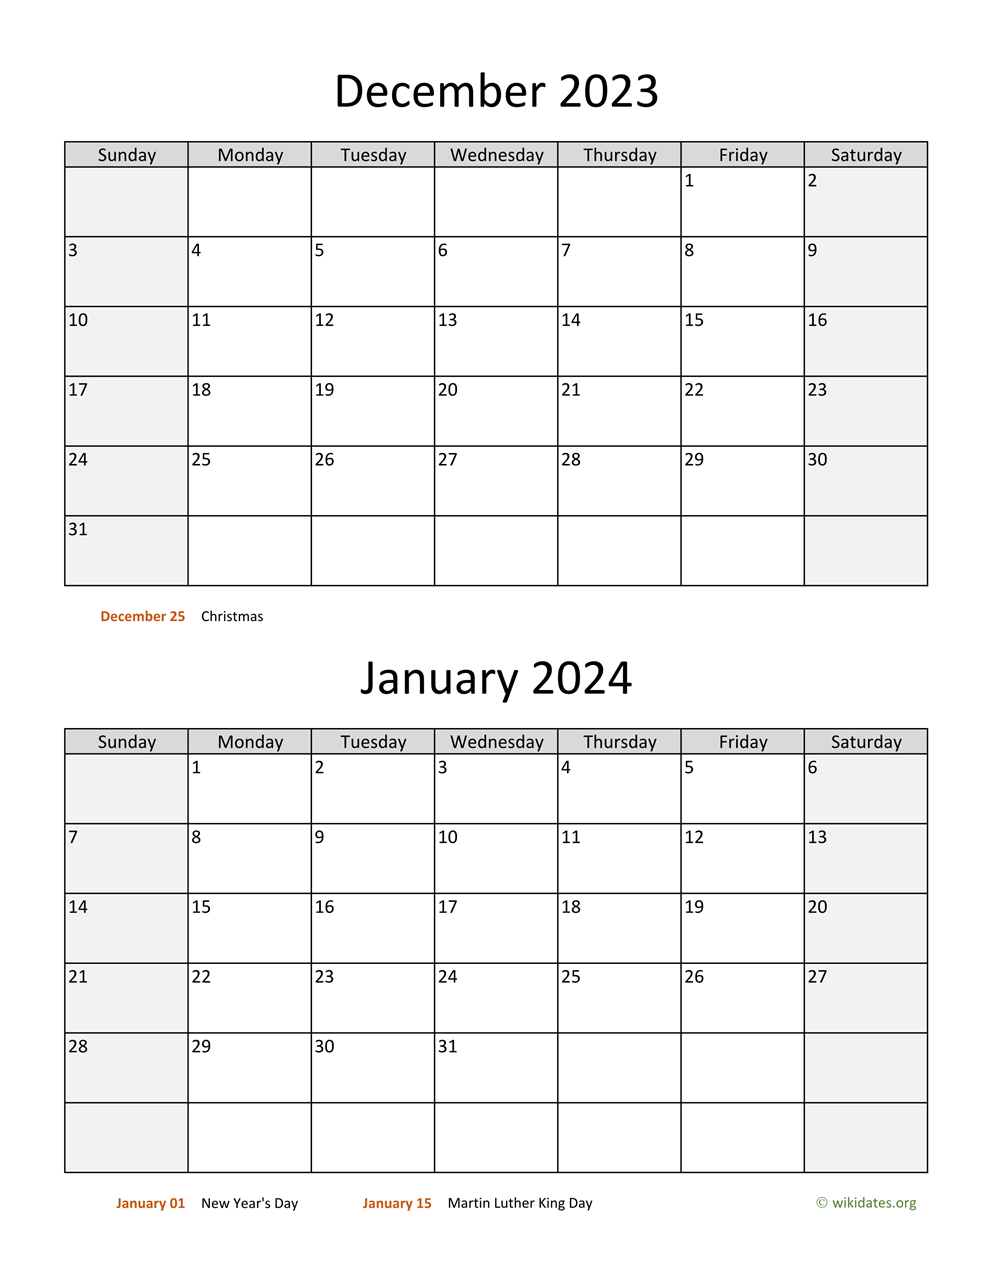 December 2023 And January 2024 Calendar | Wikidates for December 2023 January 2024 Calendar Printable